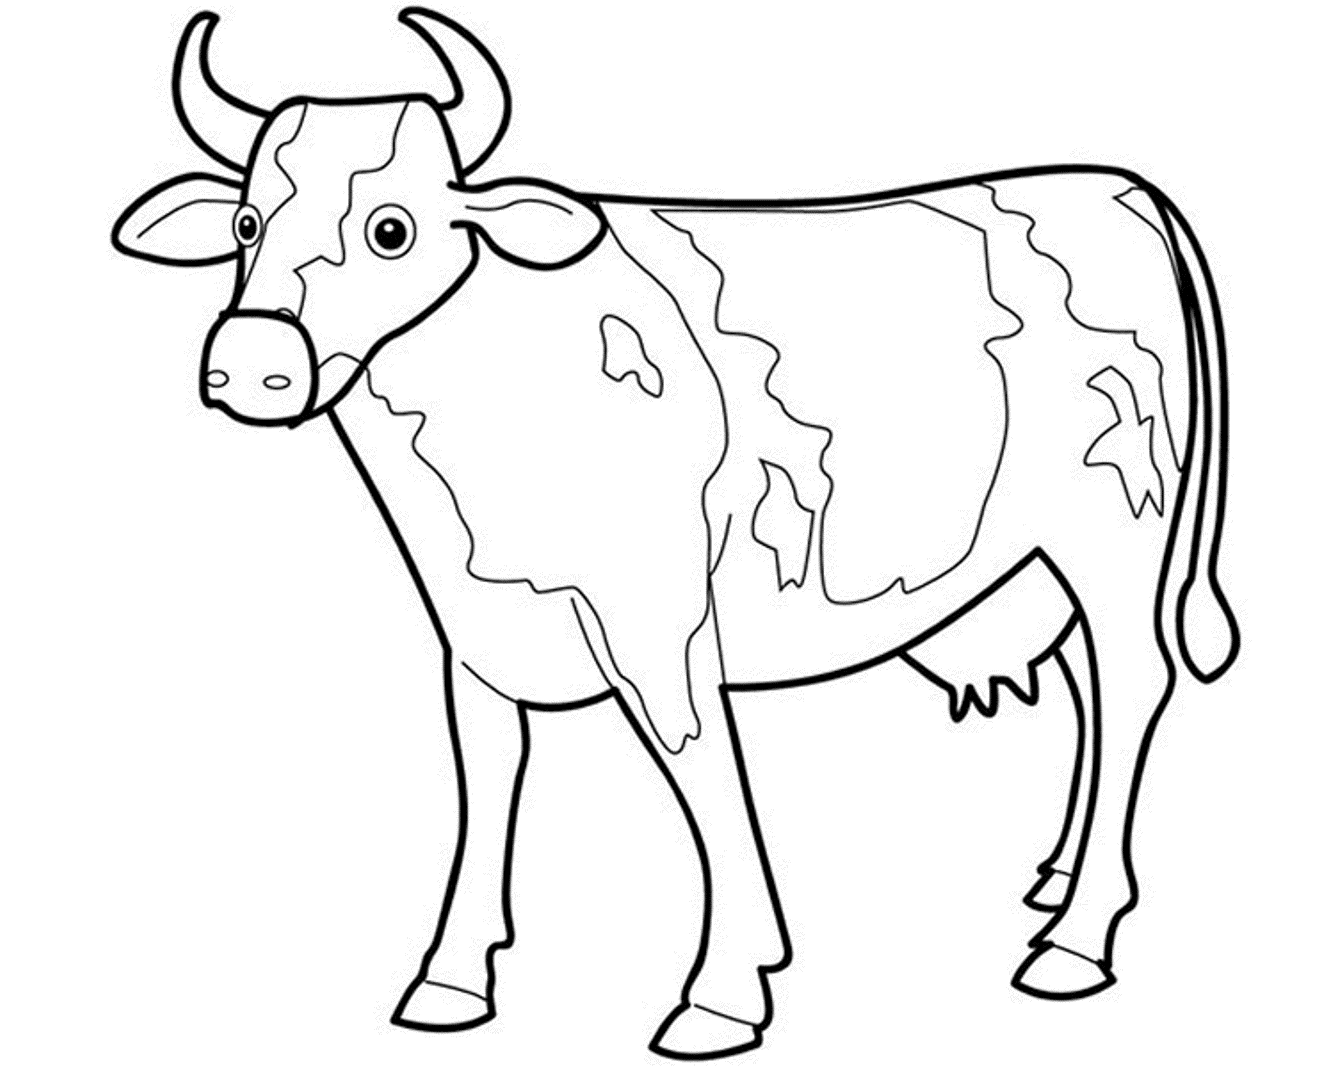 25 Easy Cow Drawings - Step By Step Guide - DIY Crafts